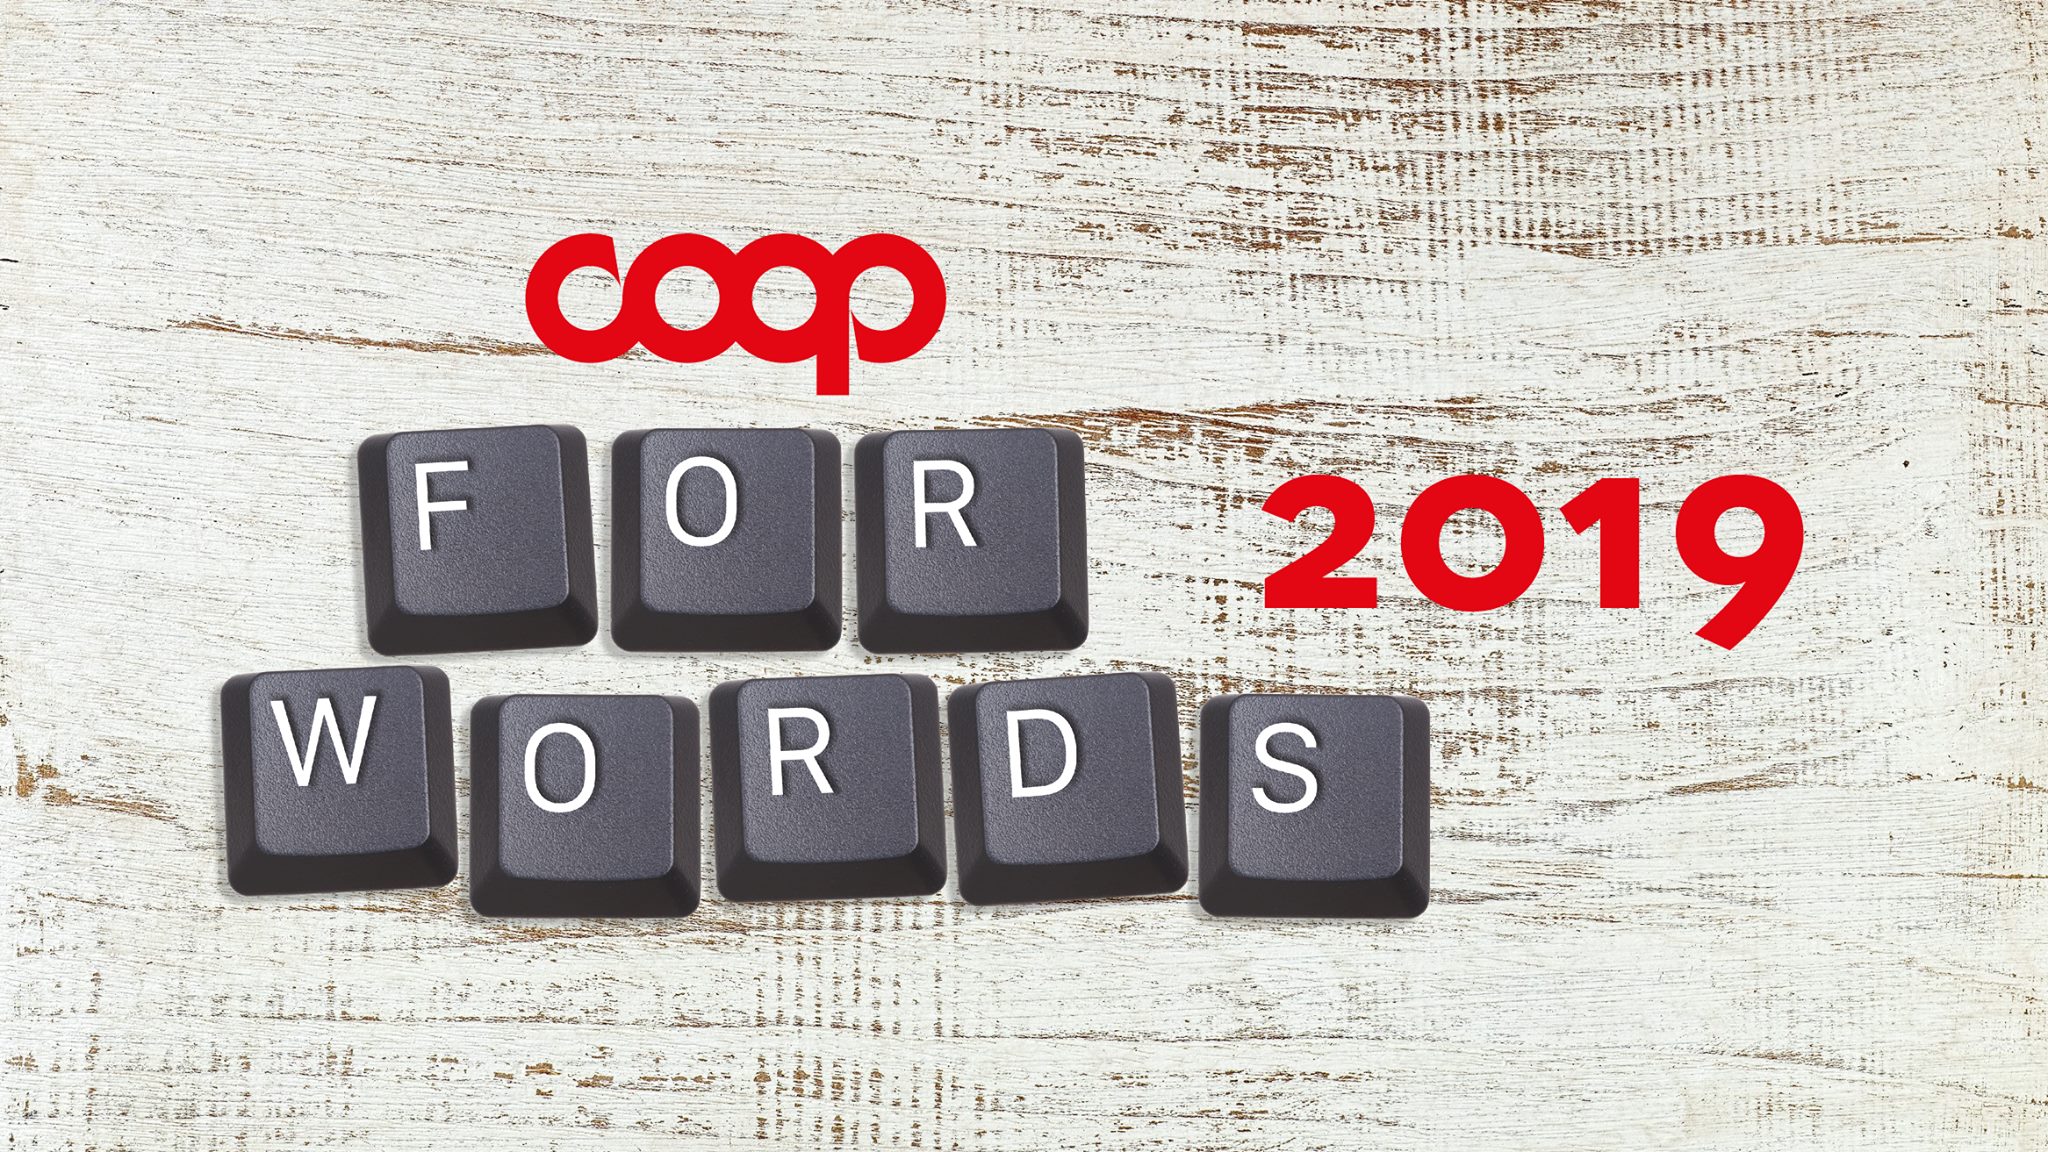 Coop for words 2019